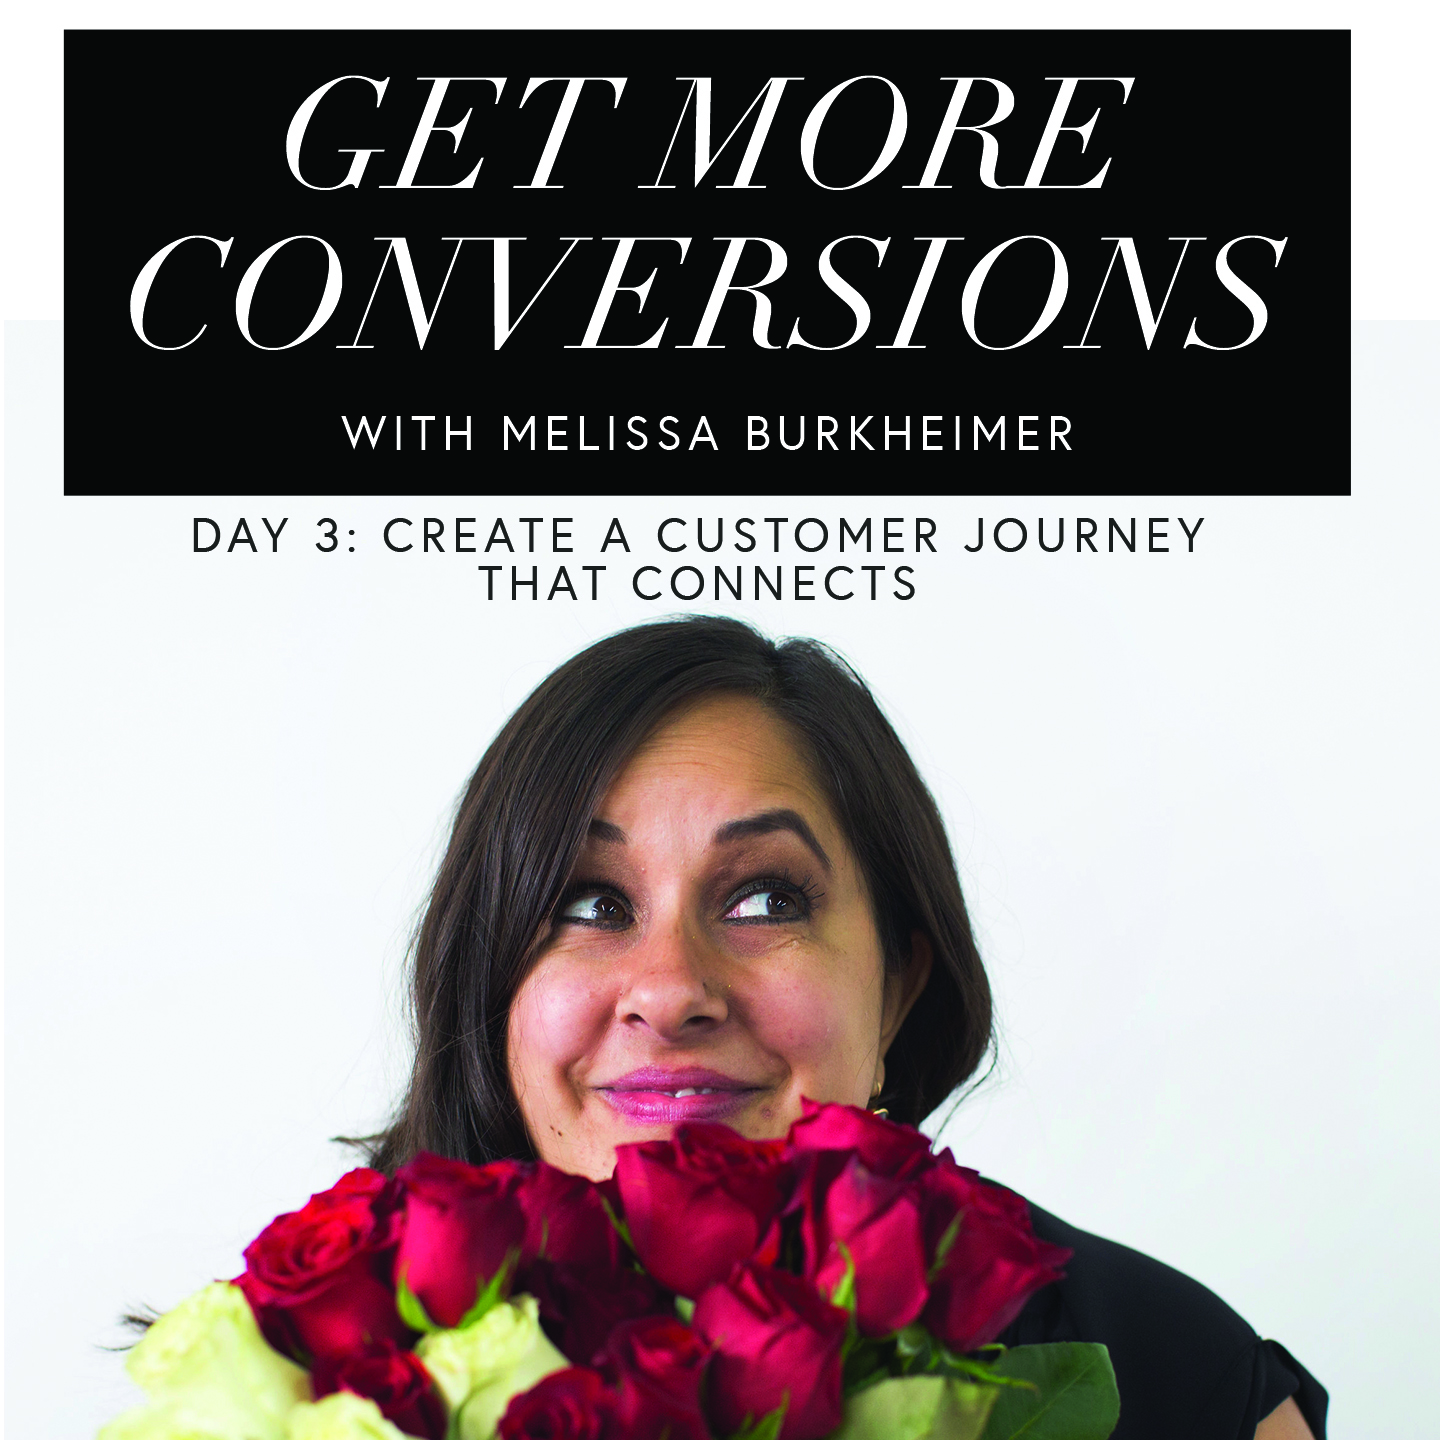 Check out episode 70 of The Design Business Show to learn how to create a customer journey that connects.